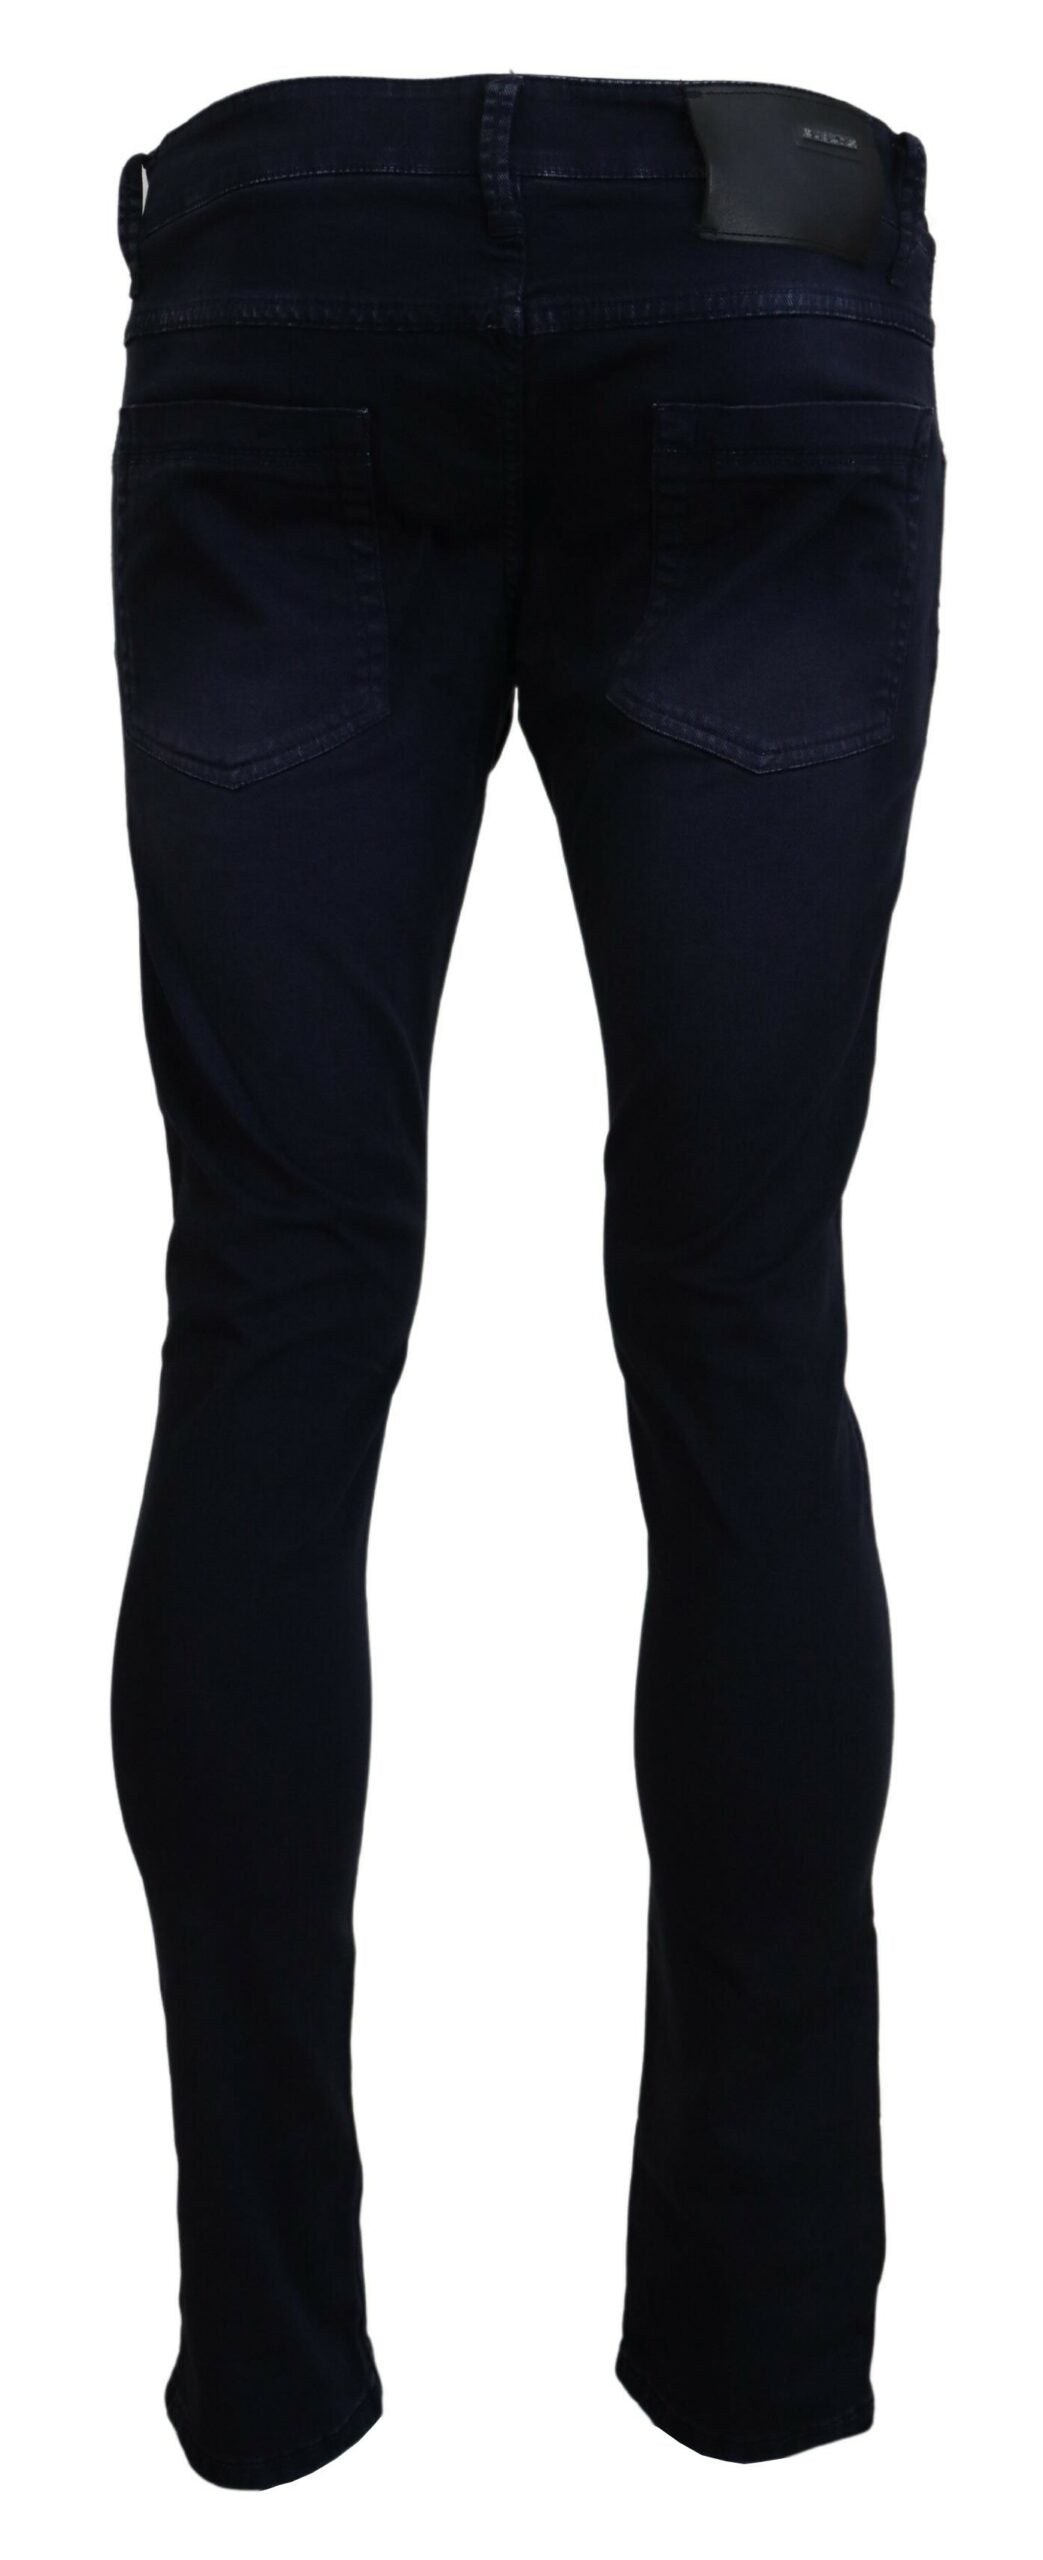 Acht Blue Cotton Tapered Slim Fit Men Casual Denim Jeans - Designed by Acht Available to Buy at a Discounted Price on Moon Behind The Hill Online Designer Discount Store